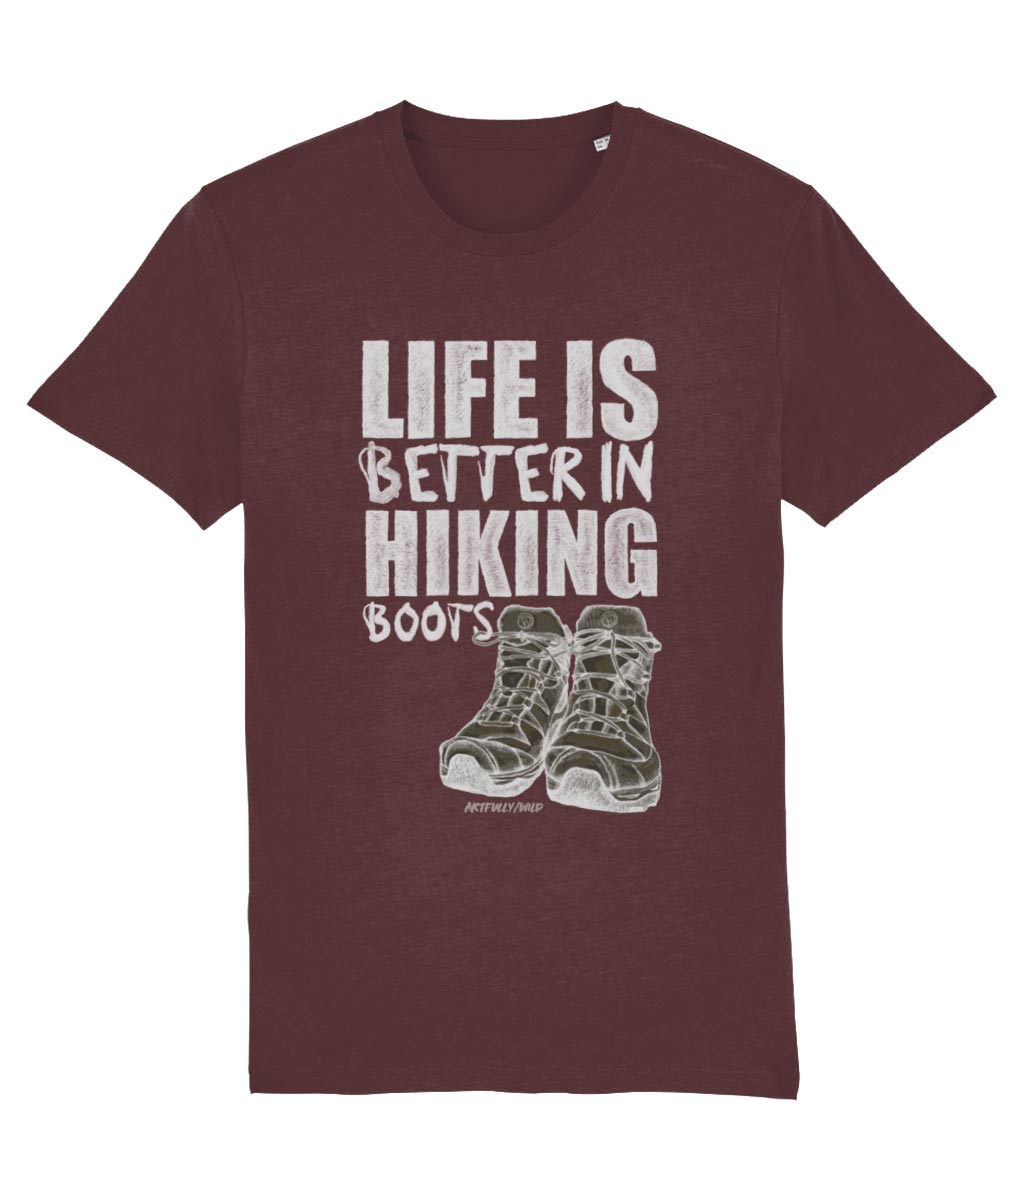 'LIFE IS BETTER IN HIKING BOOTS' Print on Burgundy T-Shirt. Unisex/Women/Men. Certified Organic Clothing. Original Sketched Illustration by Artfully/Wild. Printed in the UK for hikers and mountain lovers.